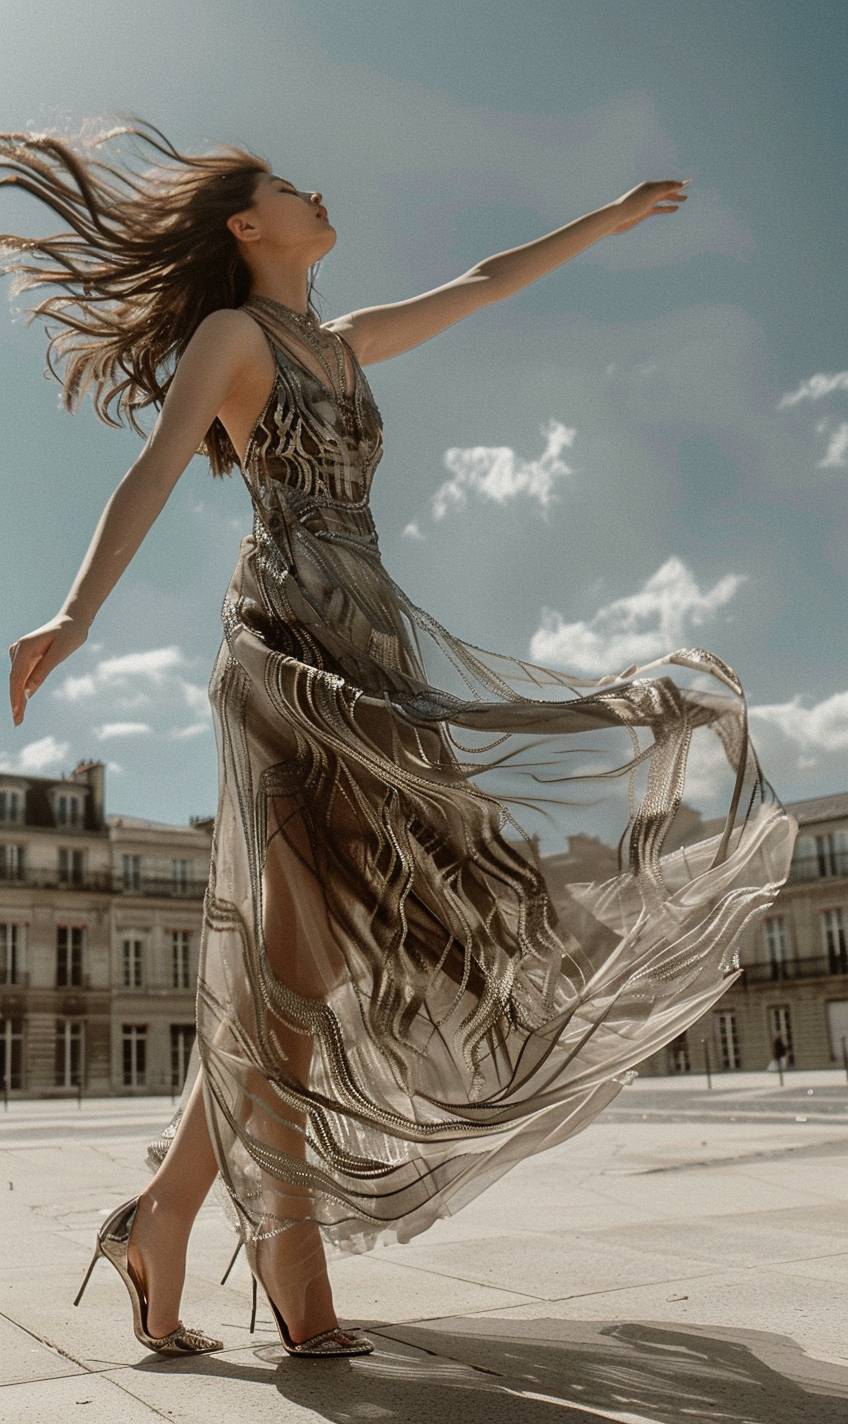 A fashion photo shows a female model wearing a sheer long gown with heels. The dress features interlacing lines of silver and black colors, shaping and flowing around the female curve, giving depth and movement to her intricate dress. There's harmony between the model and her dress. She's standing near the Place de la Nationale in Paris. The weather looks sunny. It is daylight. There is lots of white space around her.